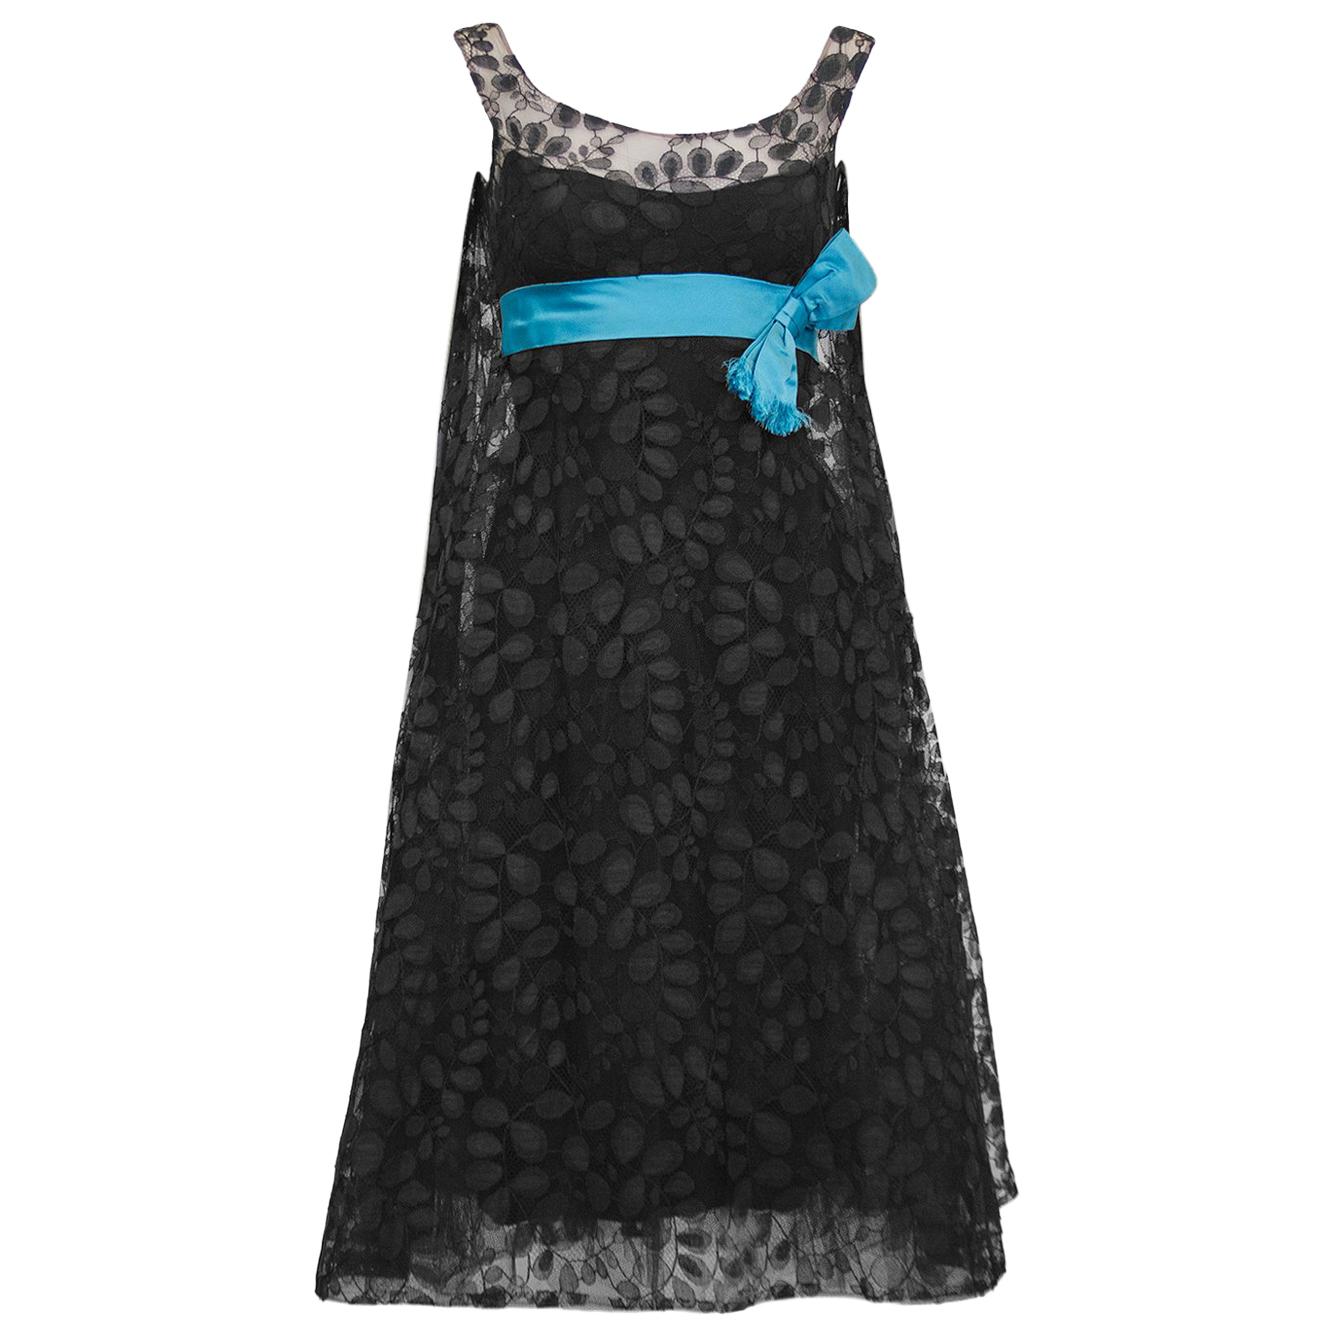 1950's Saks Fifth Avenue Black Lace Cocktail Dress with Turquoise Ribbon For Sale